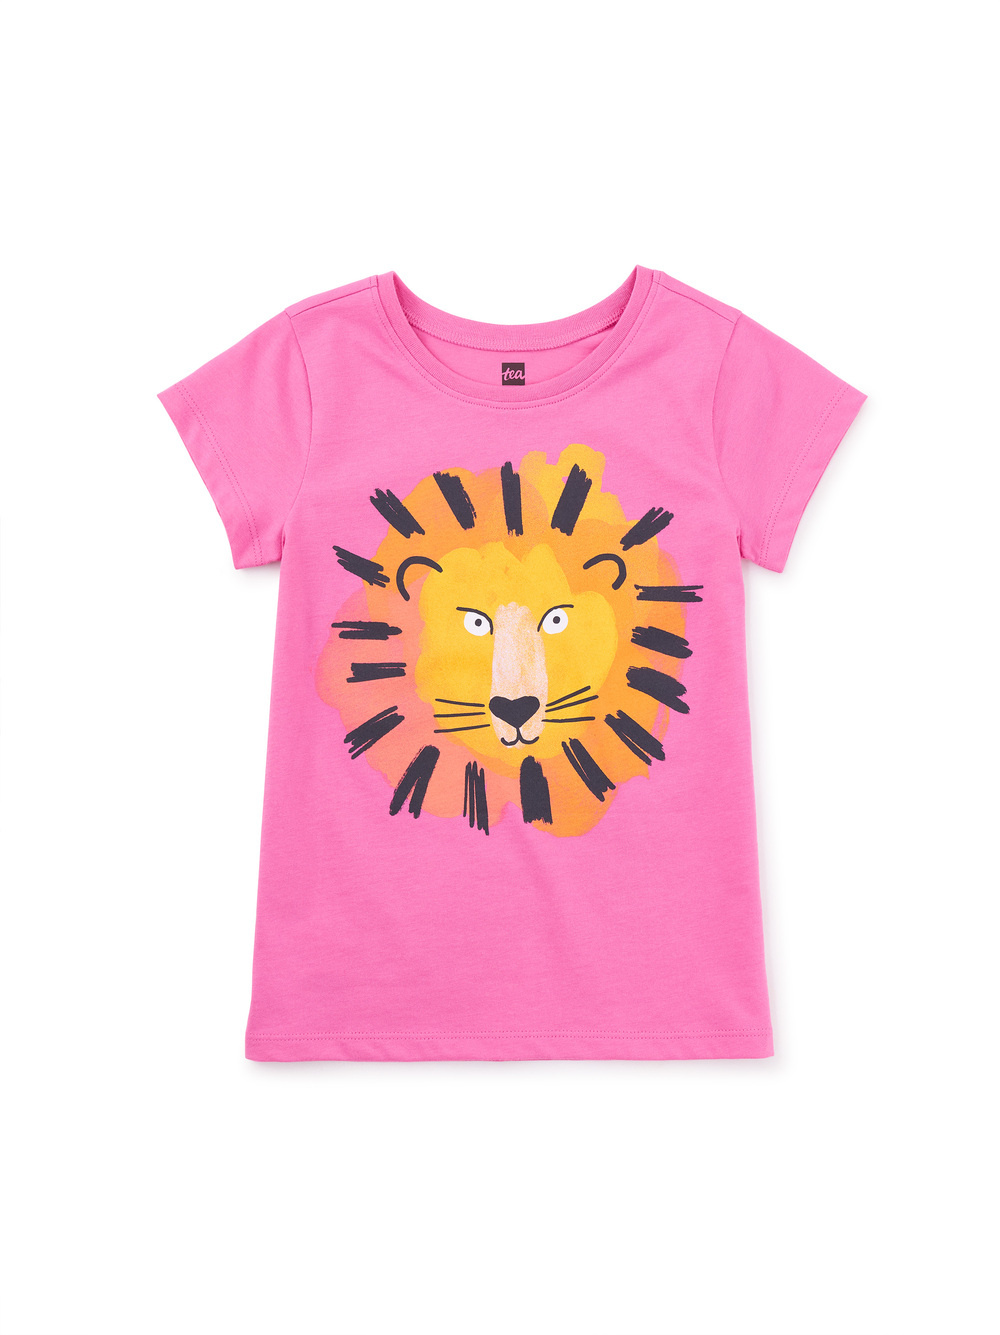 Tea Collection Lion Double-Sided Graphic Tee Carousel Pink